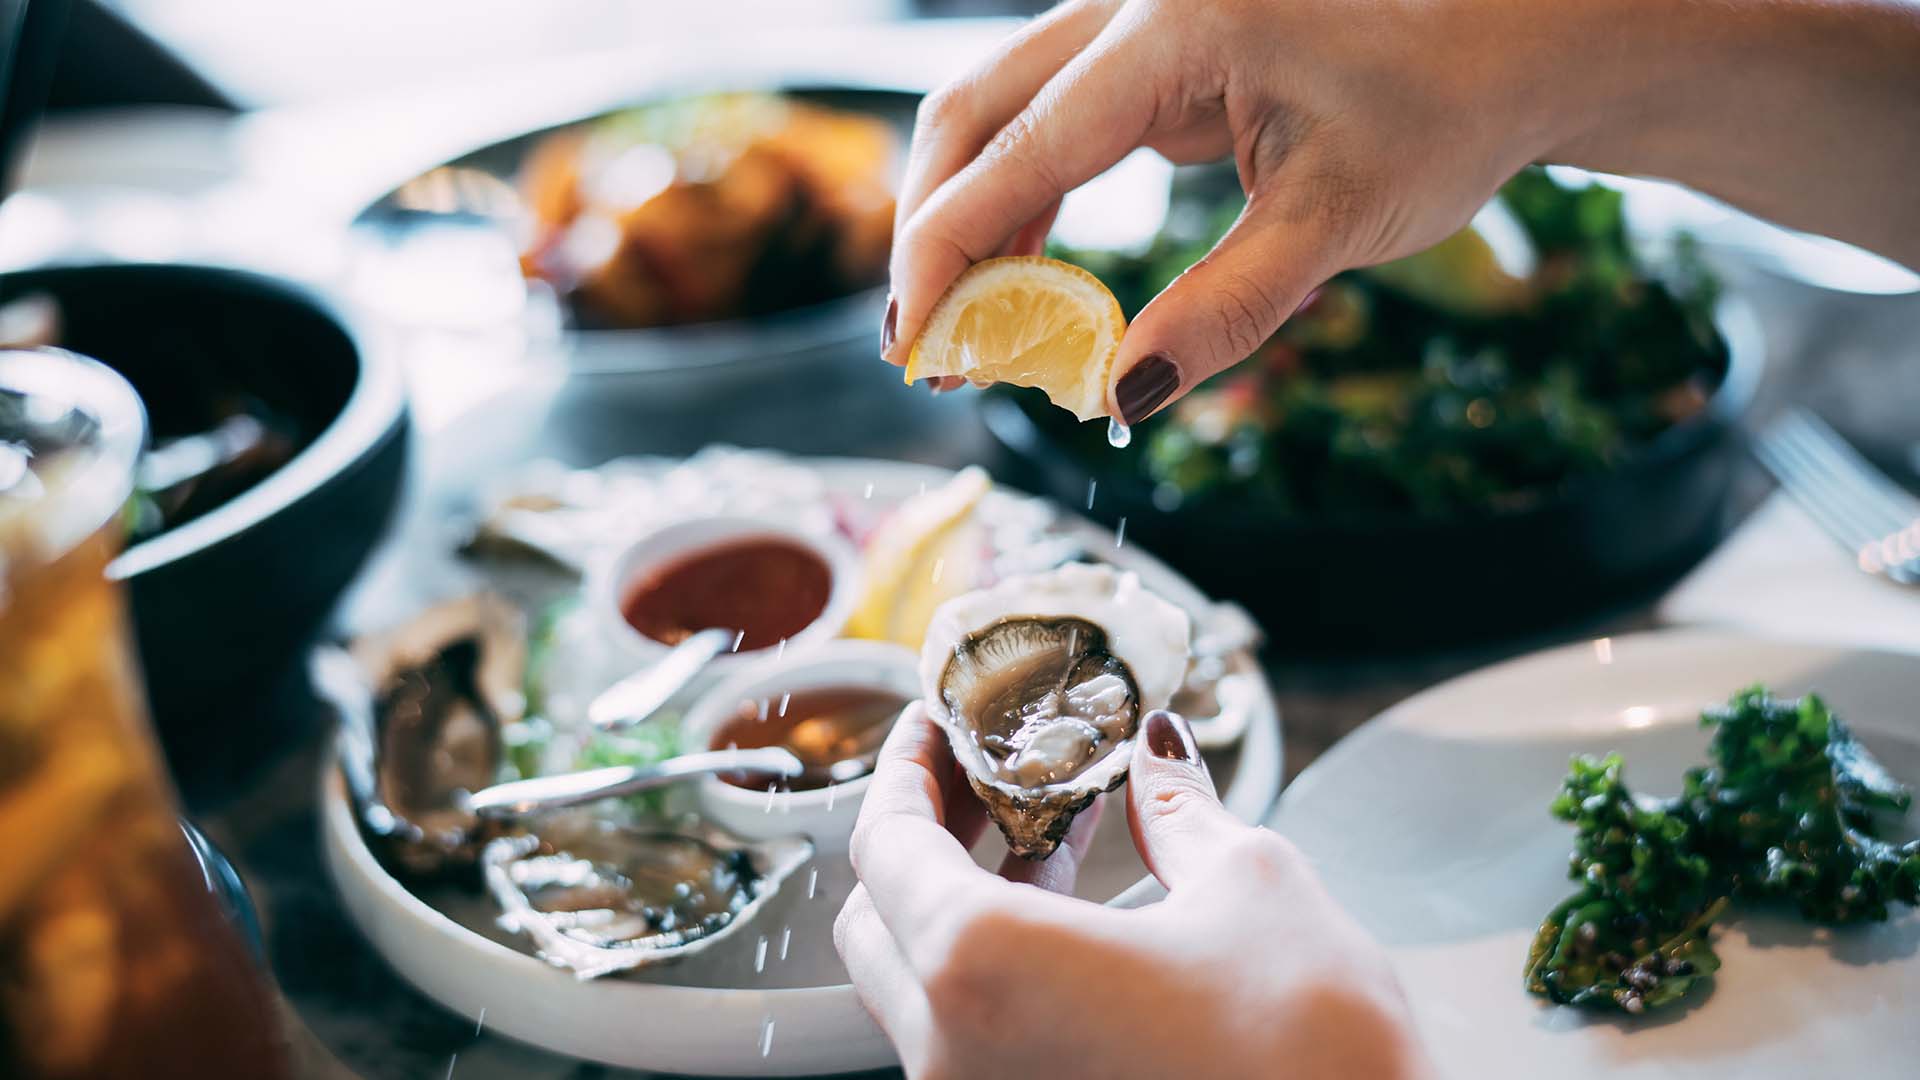 squeezing lemon on oyster